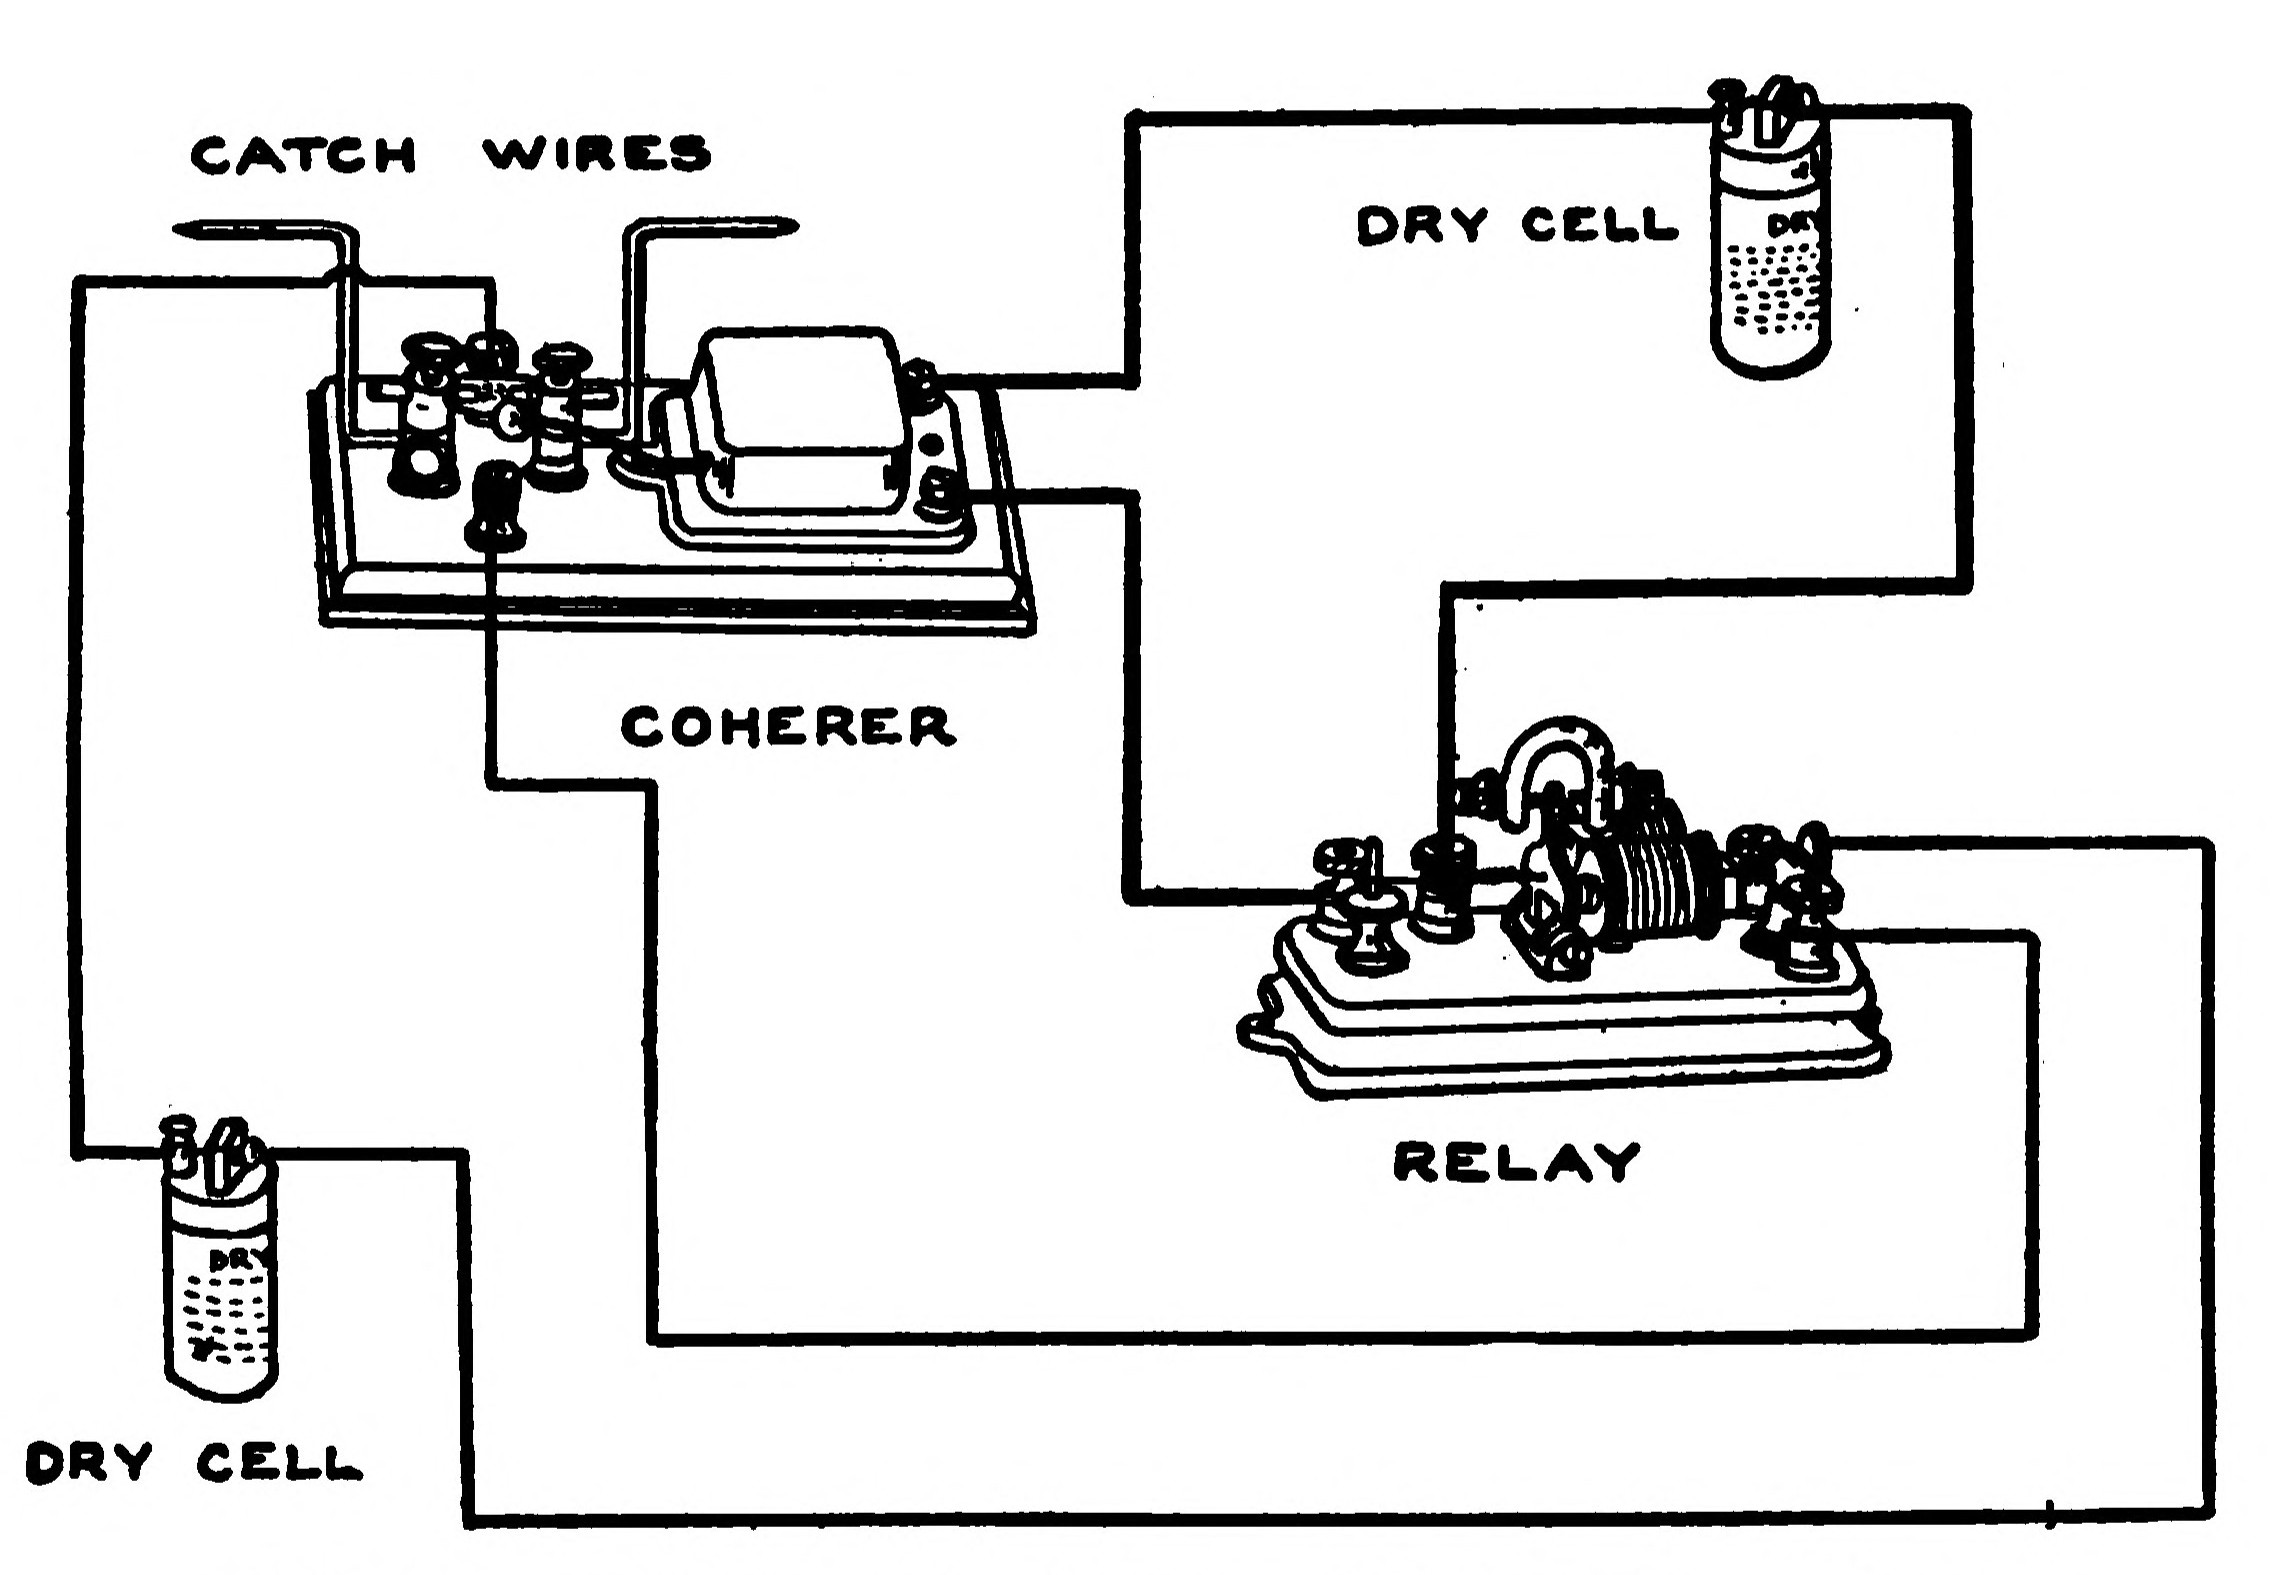 FIG. 166.—Coherer, Decoherer and Relay Connections.